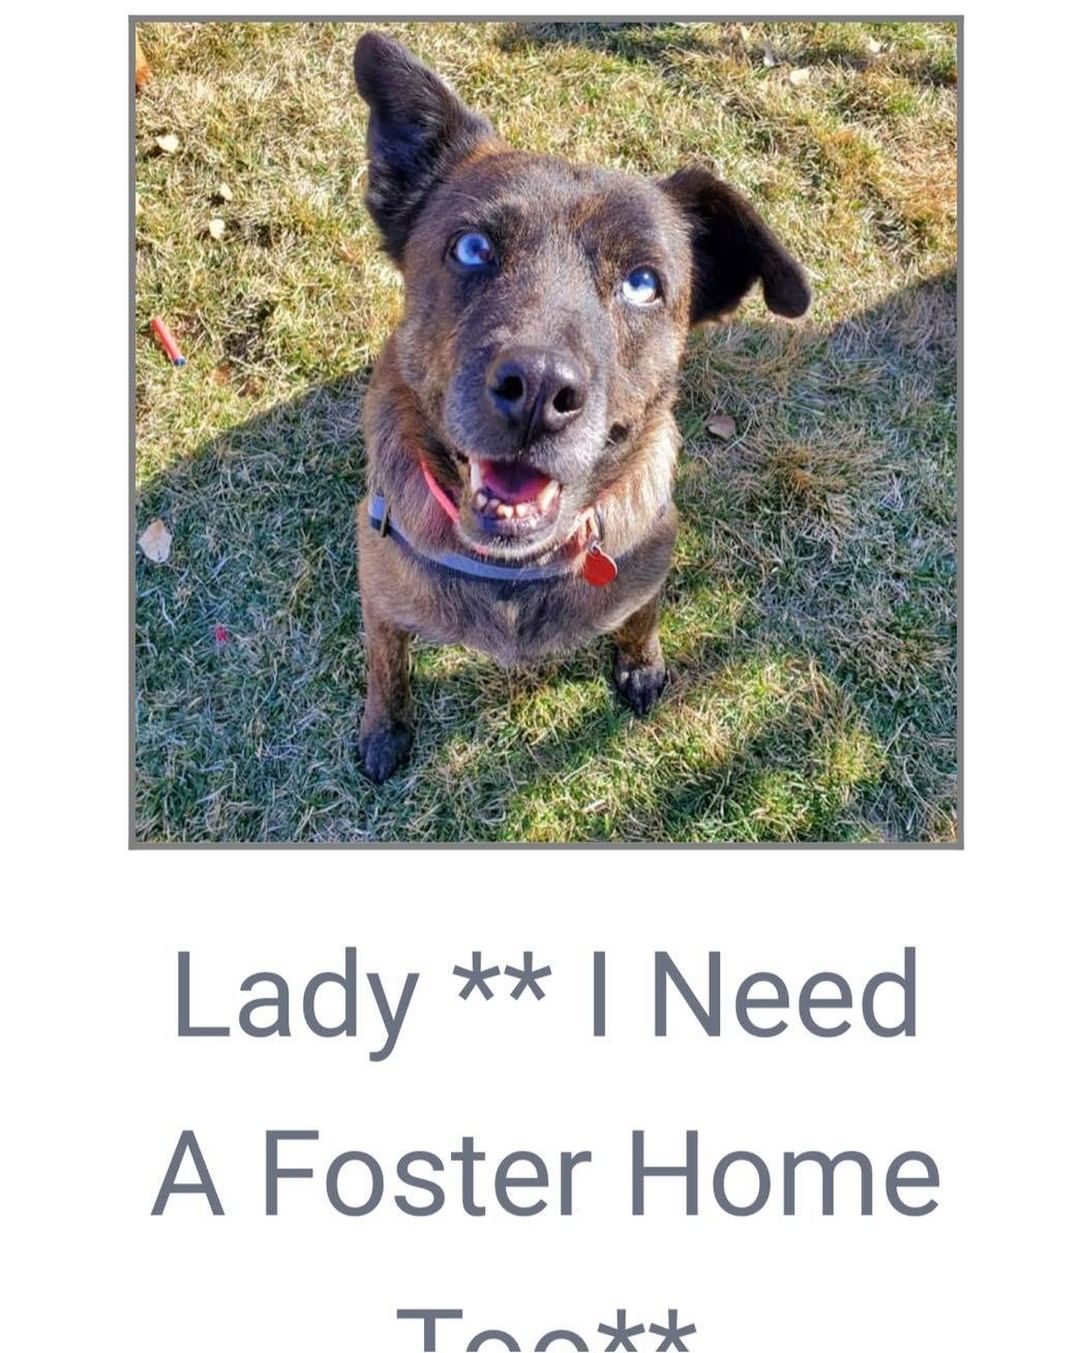 Fosters needed!

We have 10 dogs currently in boarding, and we would love to get them into foster or forever homes.

Fostering let’s our dogs adjust, and allows their personalities to blossom. We learn so much more about them when they get to live in foster homes. 

If you foster, all supplies are provided, crate, leash, collar, etc. 

Check out the 10 dogs currently in boarding and let us know if you’re available to help! 

Our longest boarding residents are Luki, Bolt and Millie who have been in boarding for 2 months. These loving, amazing dogs deserve life in a home, can you help them?